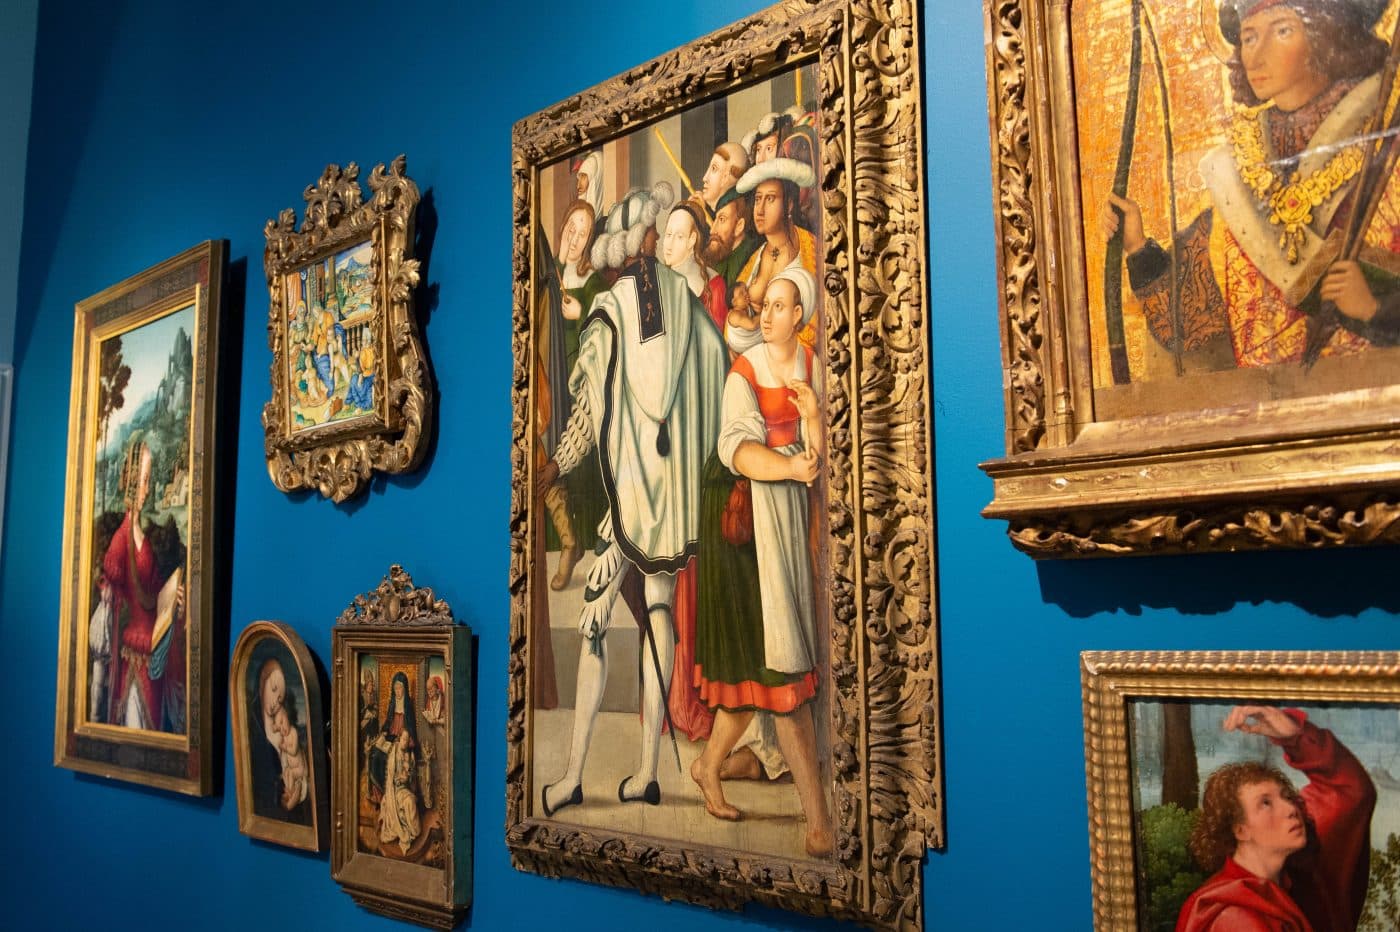 Renaissance paintings from across Europe shows in Waddesdon Manor's Exhibition Gallery part of the show "Alice's Wonderlands" about Alice de Rothschild in England